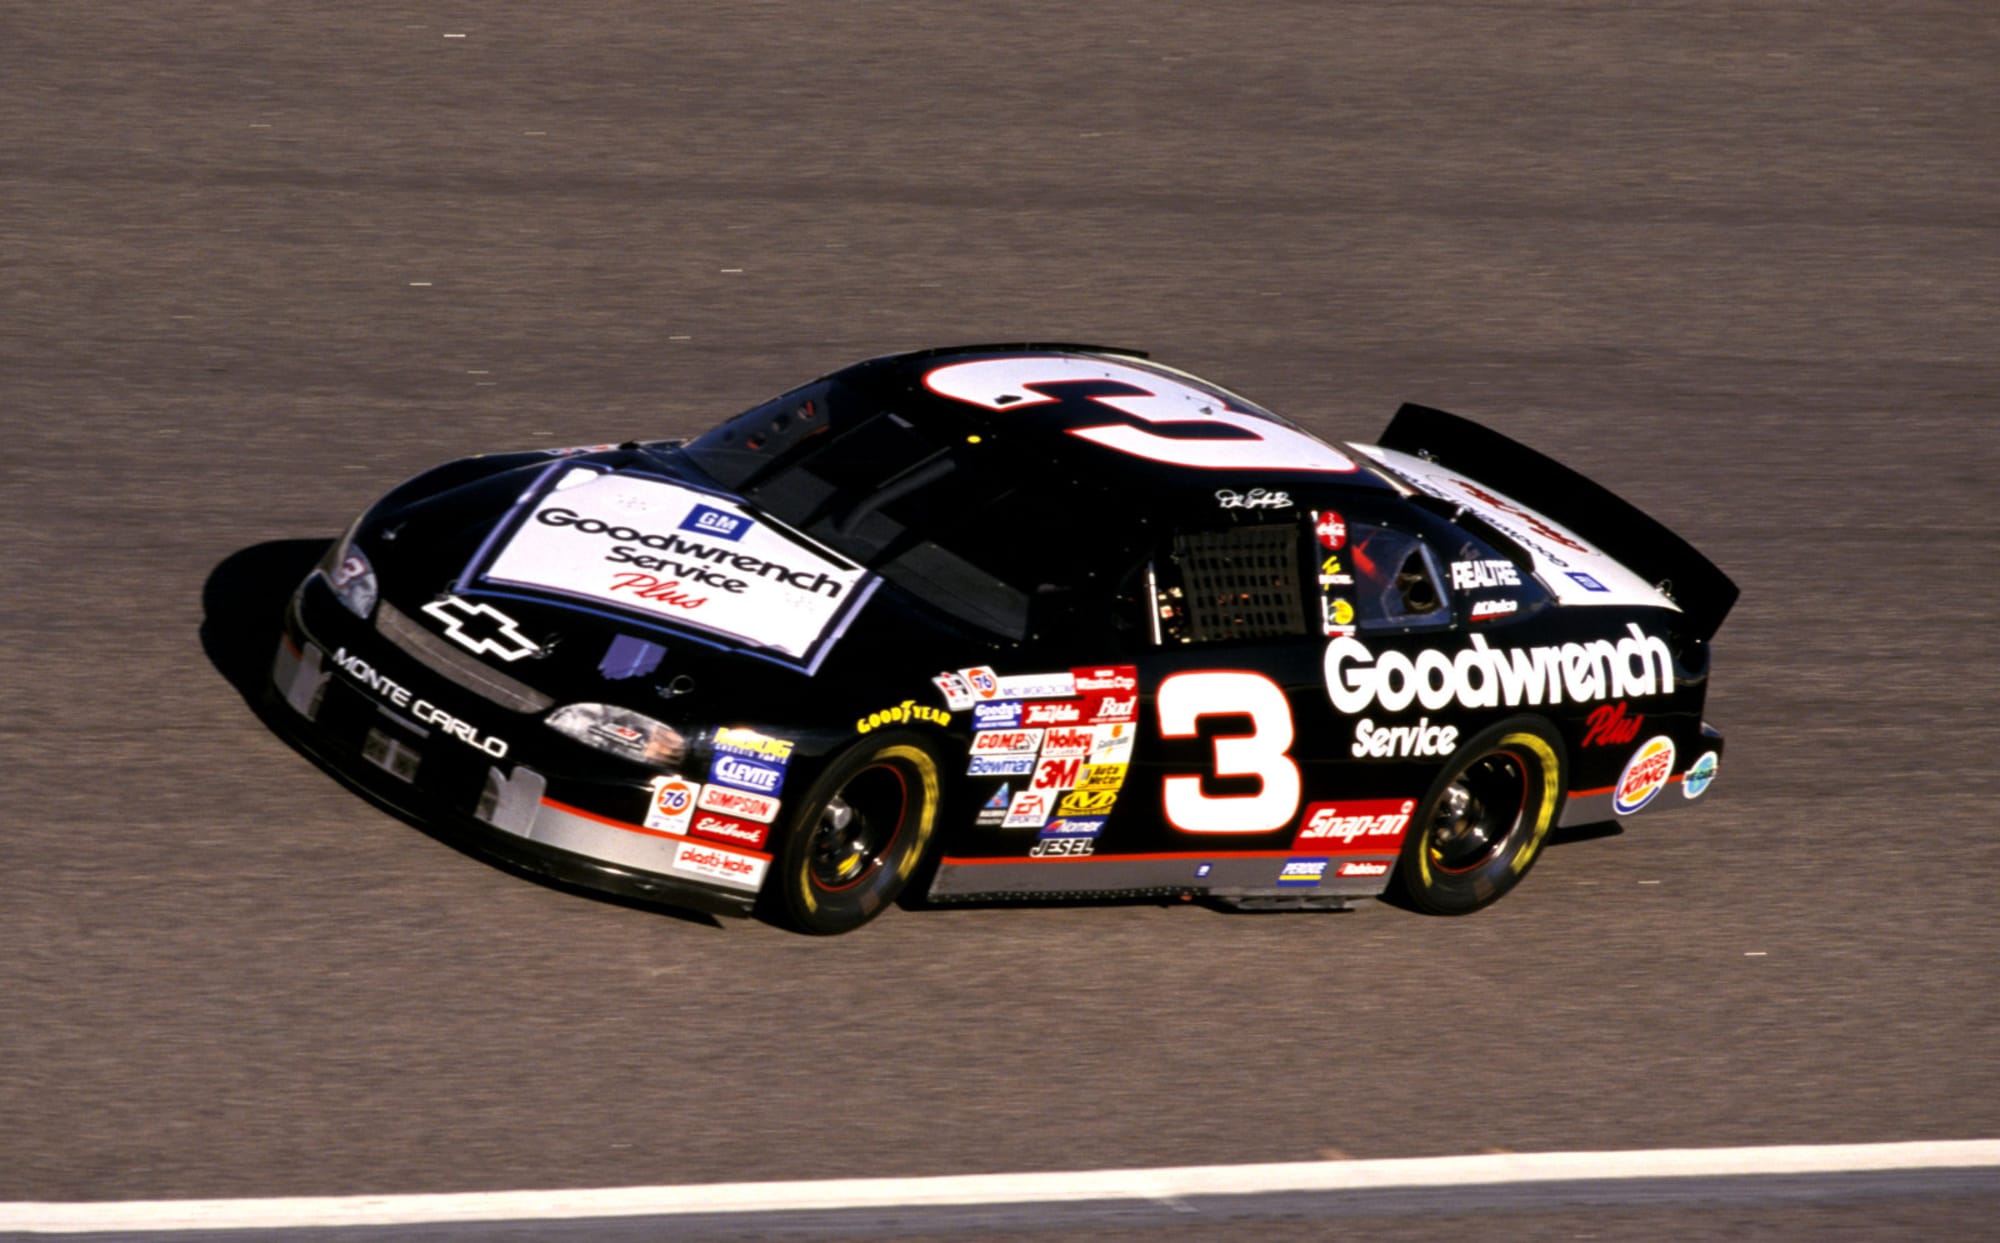 NASCAR Cup Series: Dale Earnhardt’s #3 being retired?